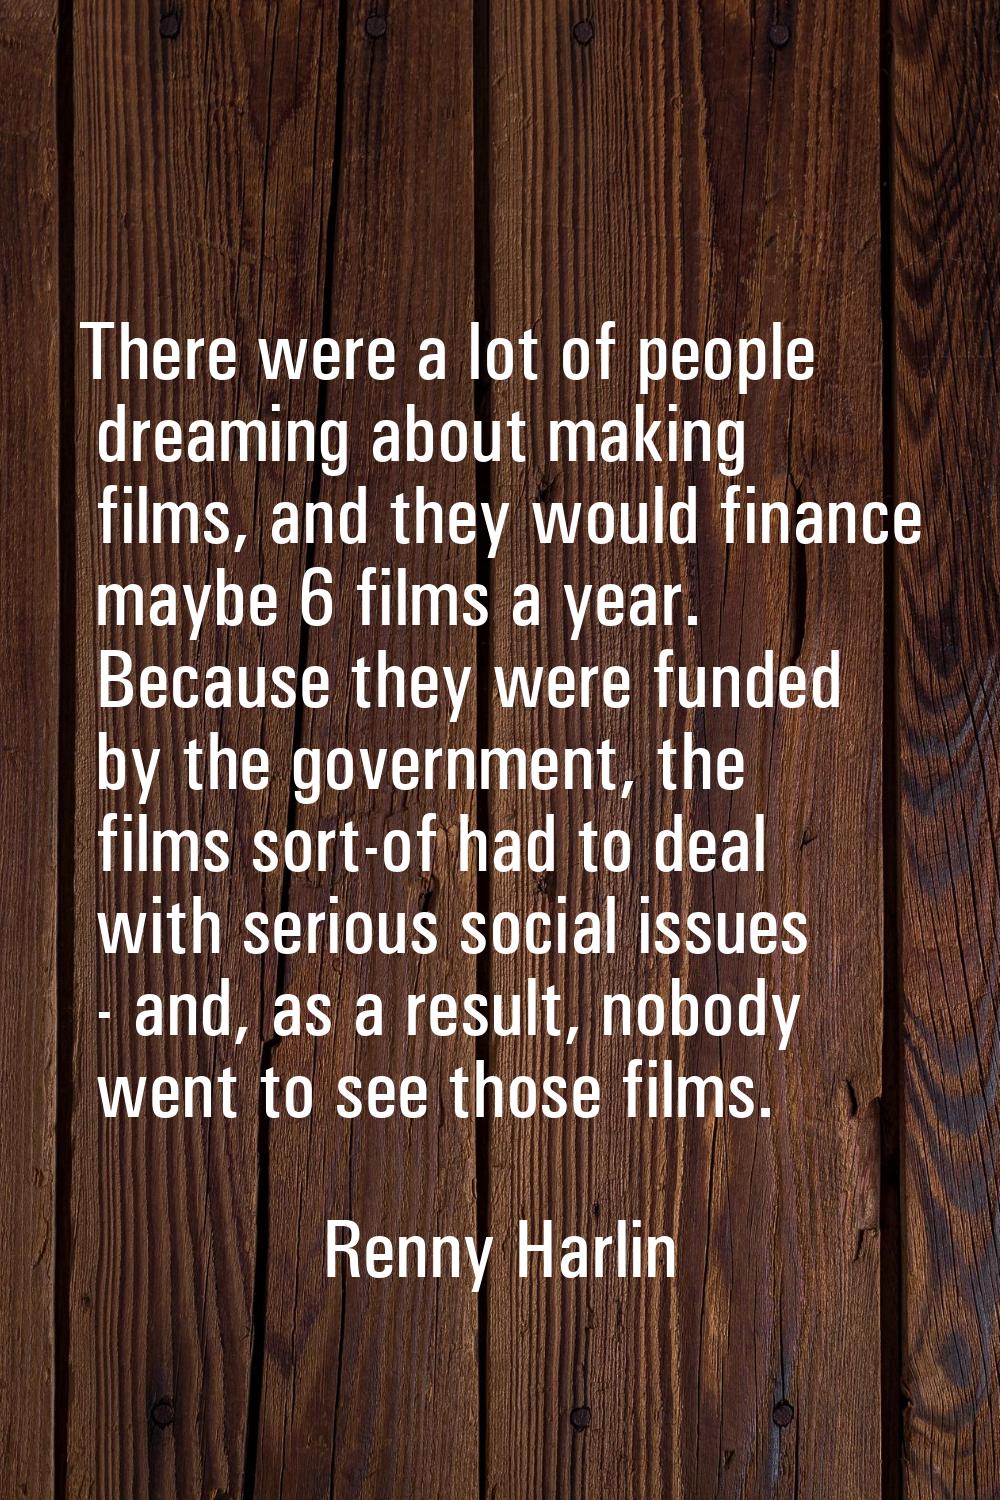 There were a lot of people dreaming about making films, and they would finance maybe 6 films a year